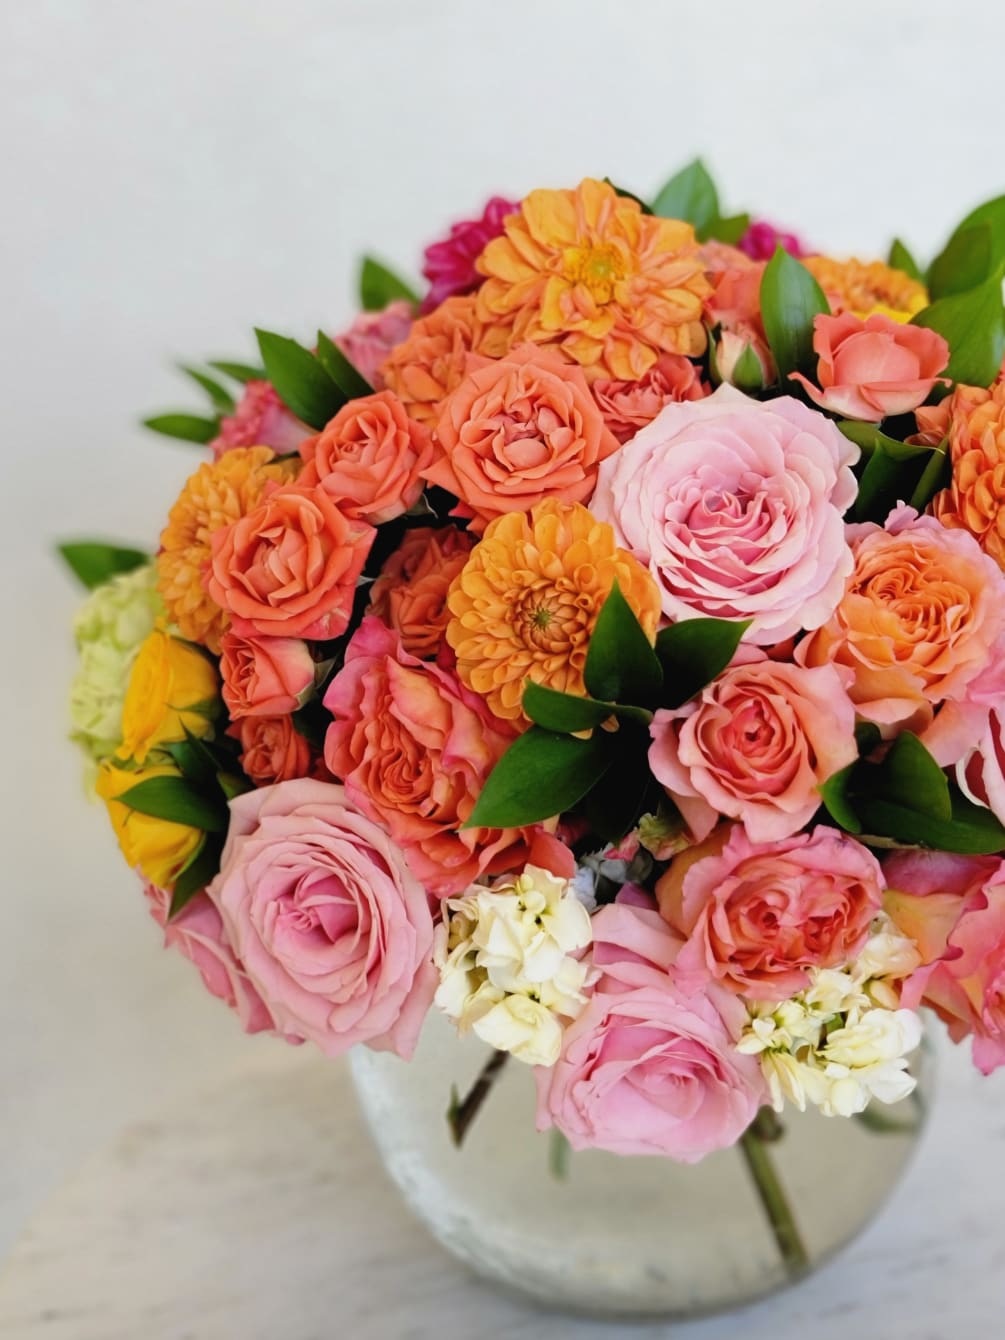 The combination of orange and pink roses looks beautiful and fresh! 
Such